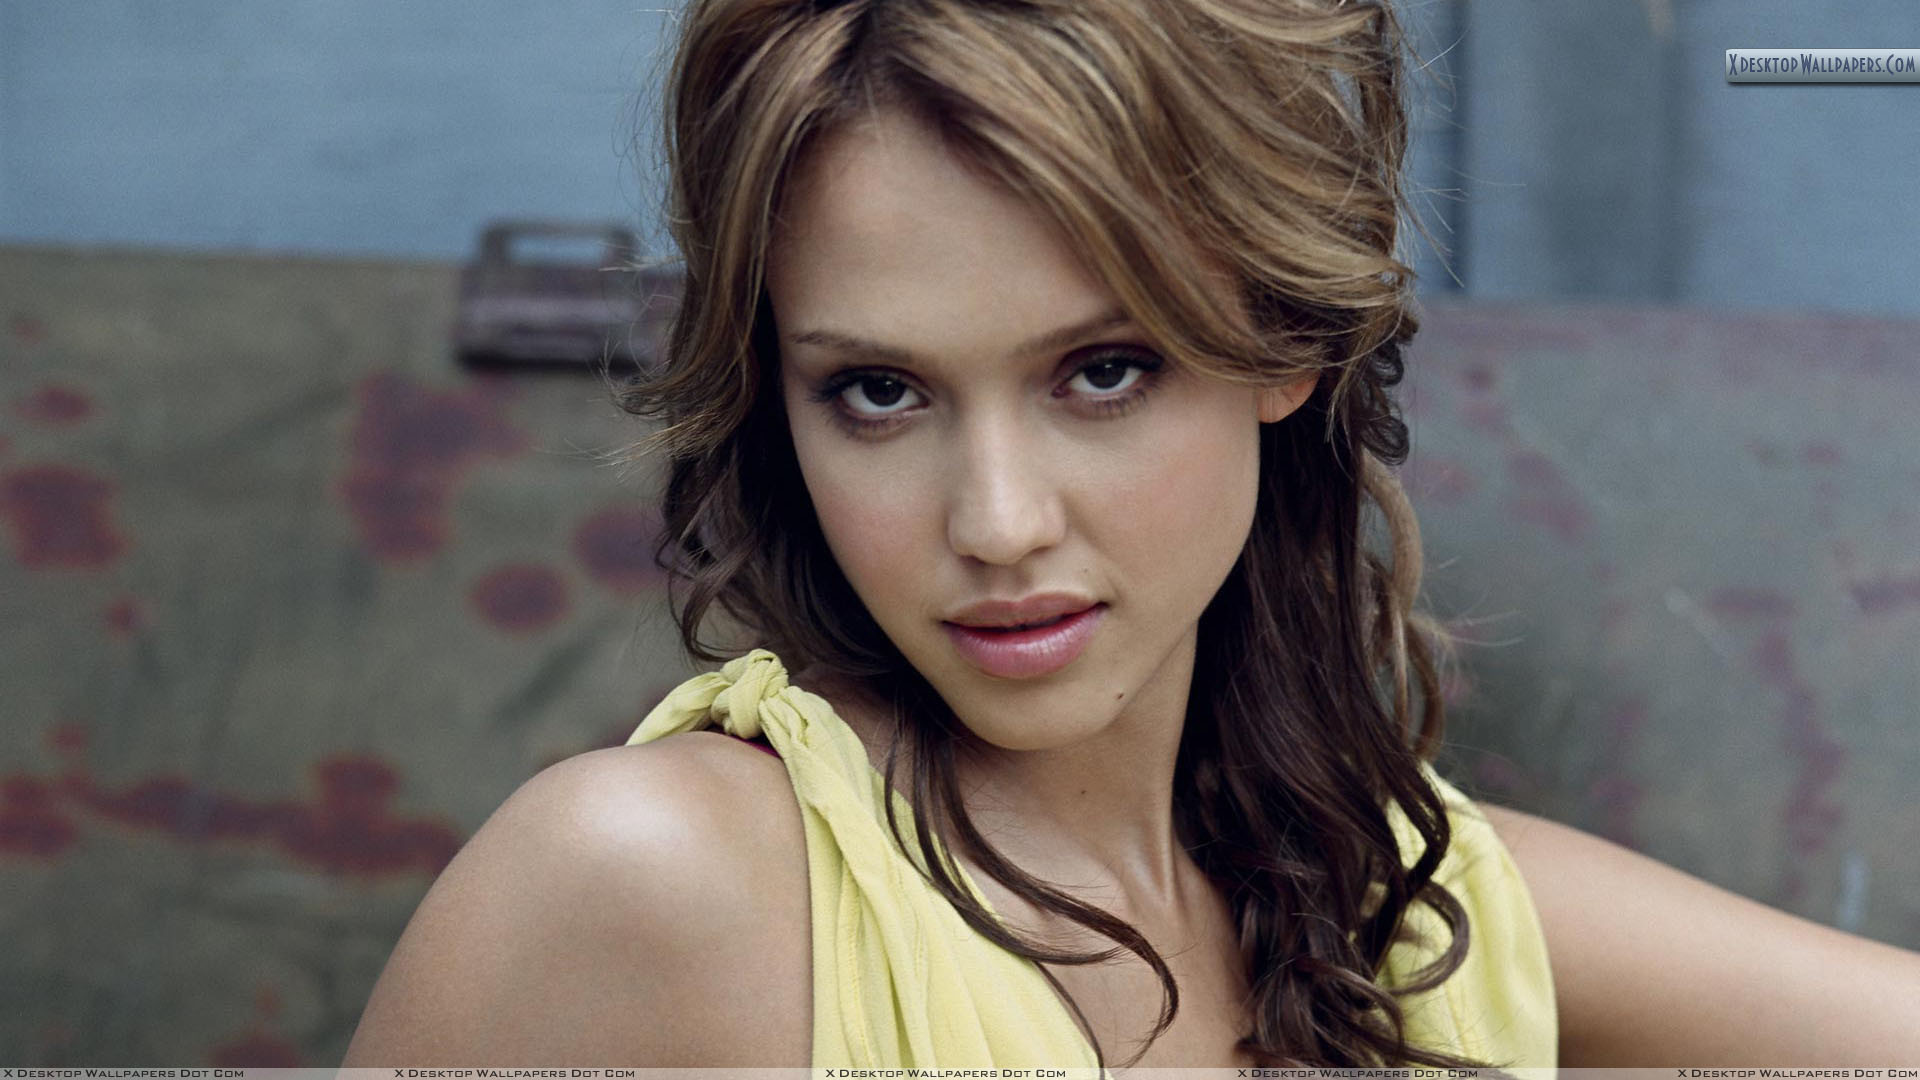 1920x1080 You are viewing wallpaper titled "Jessica Alba ...